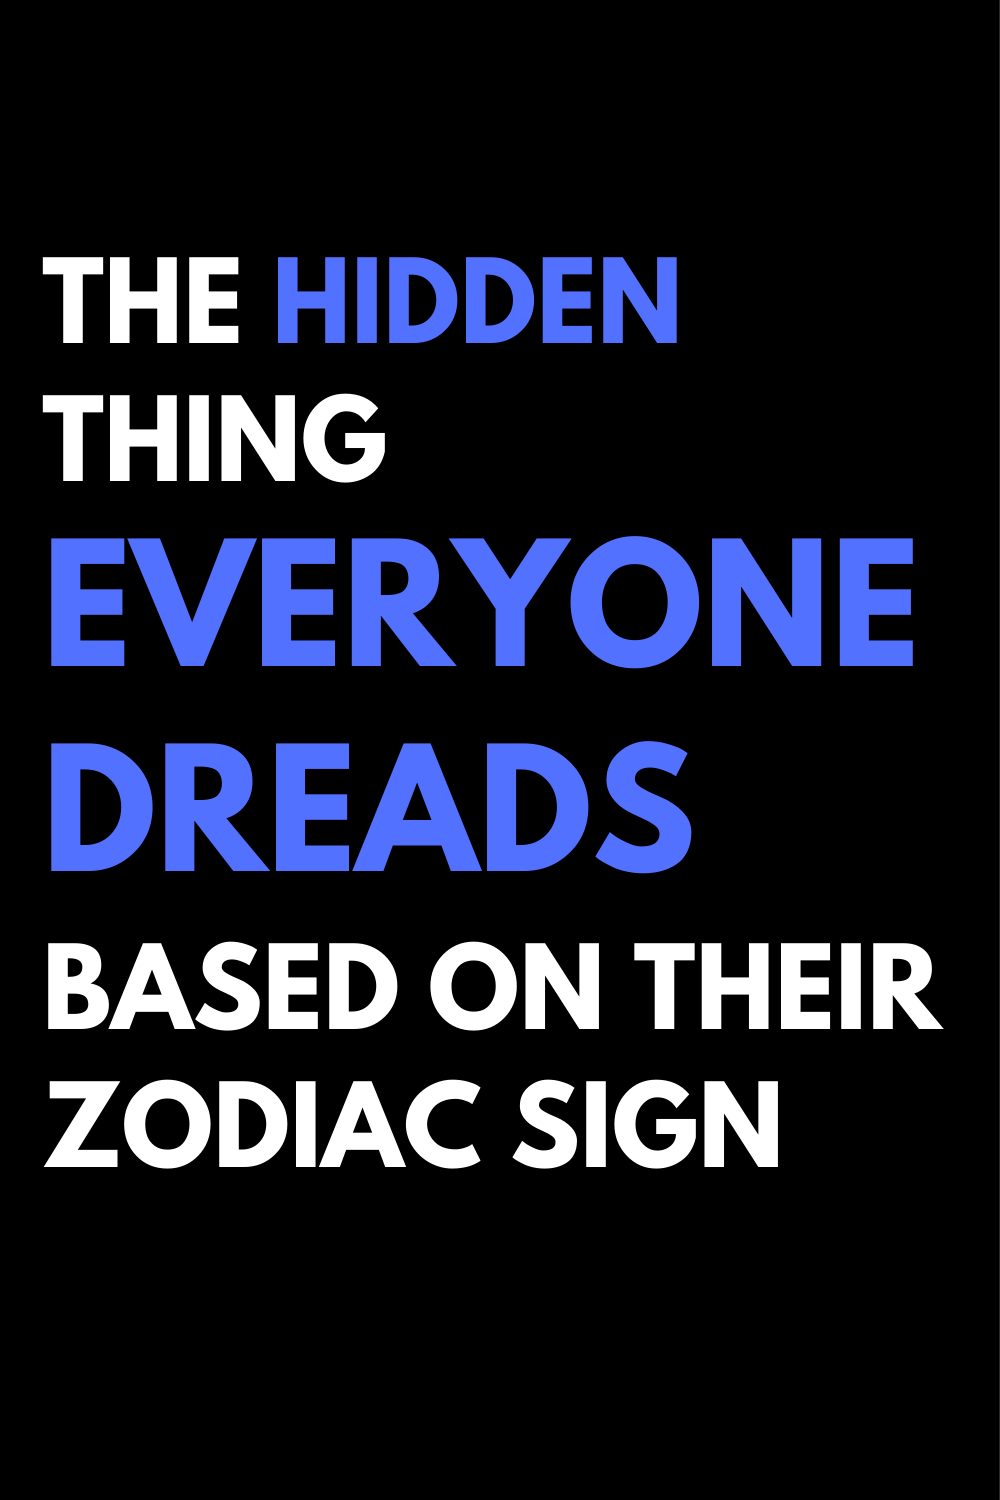 The Hidden Thing Everyone Dreads Based on Their Zodiac Sign